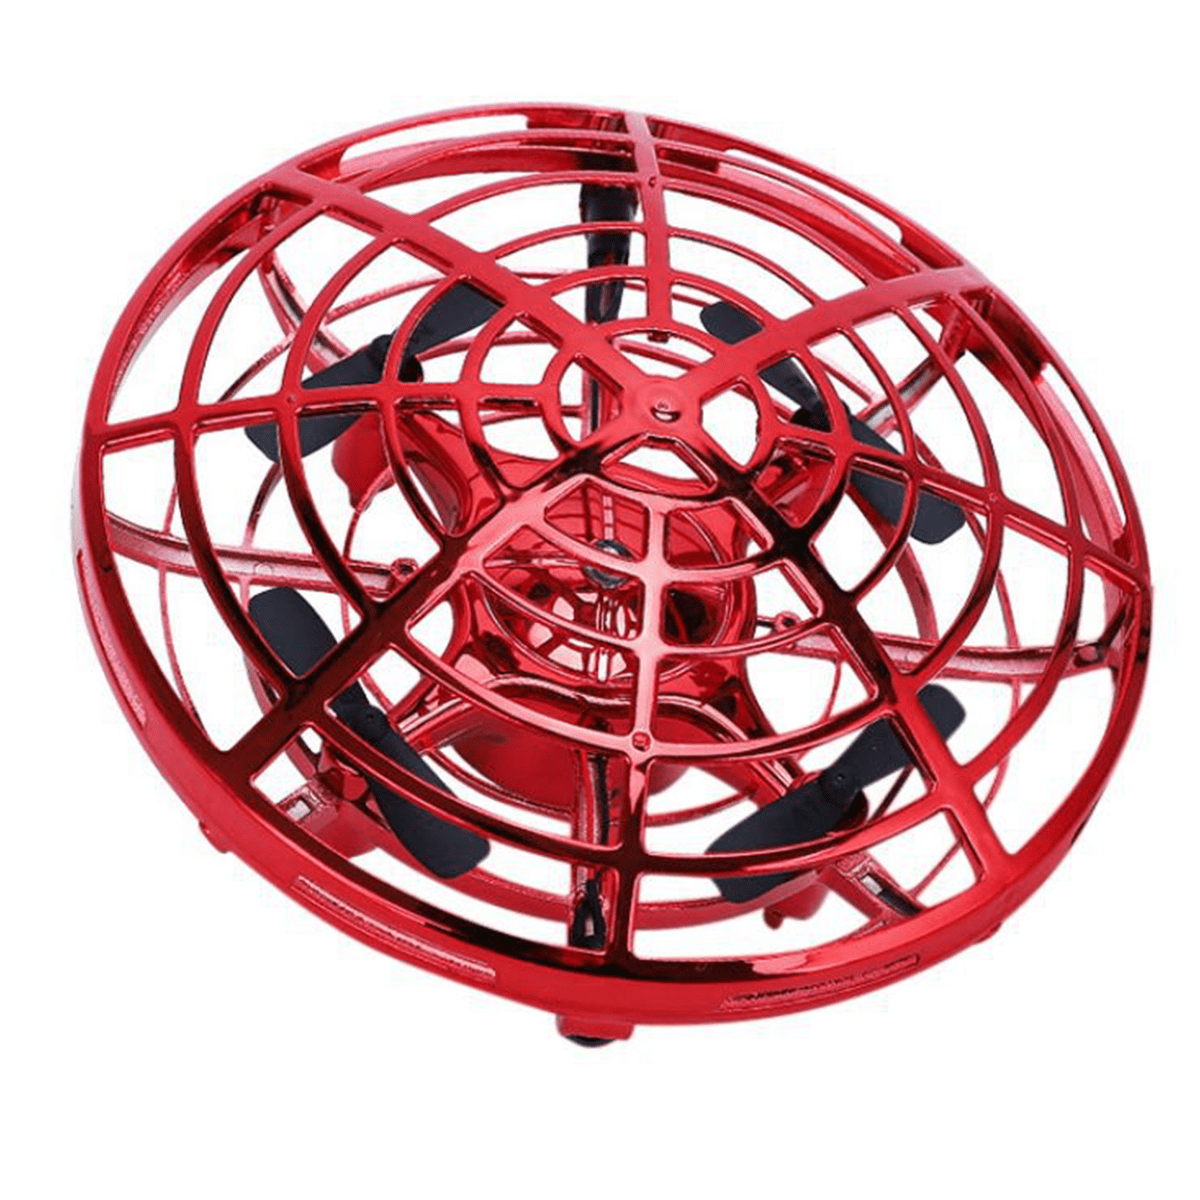 Details about   UFO Smart Flying Mini Drone Helicopter RC Quadcopter Sensing Light Indoor Toy N# 